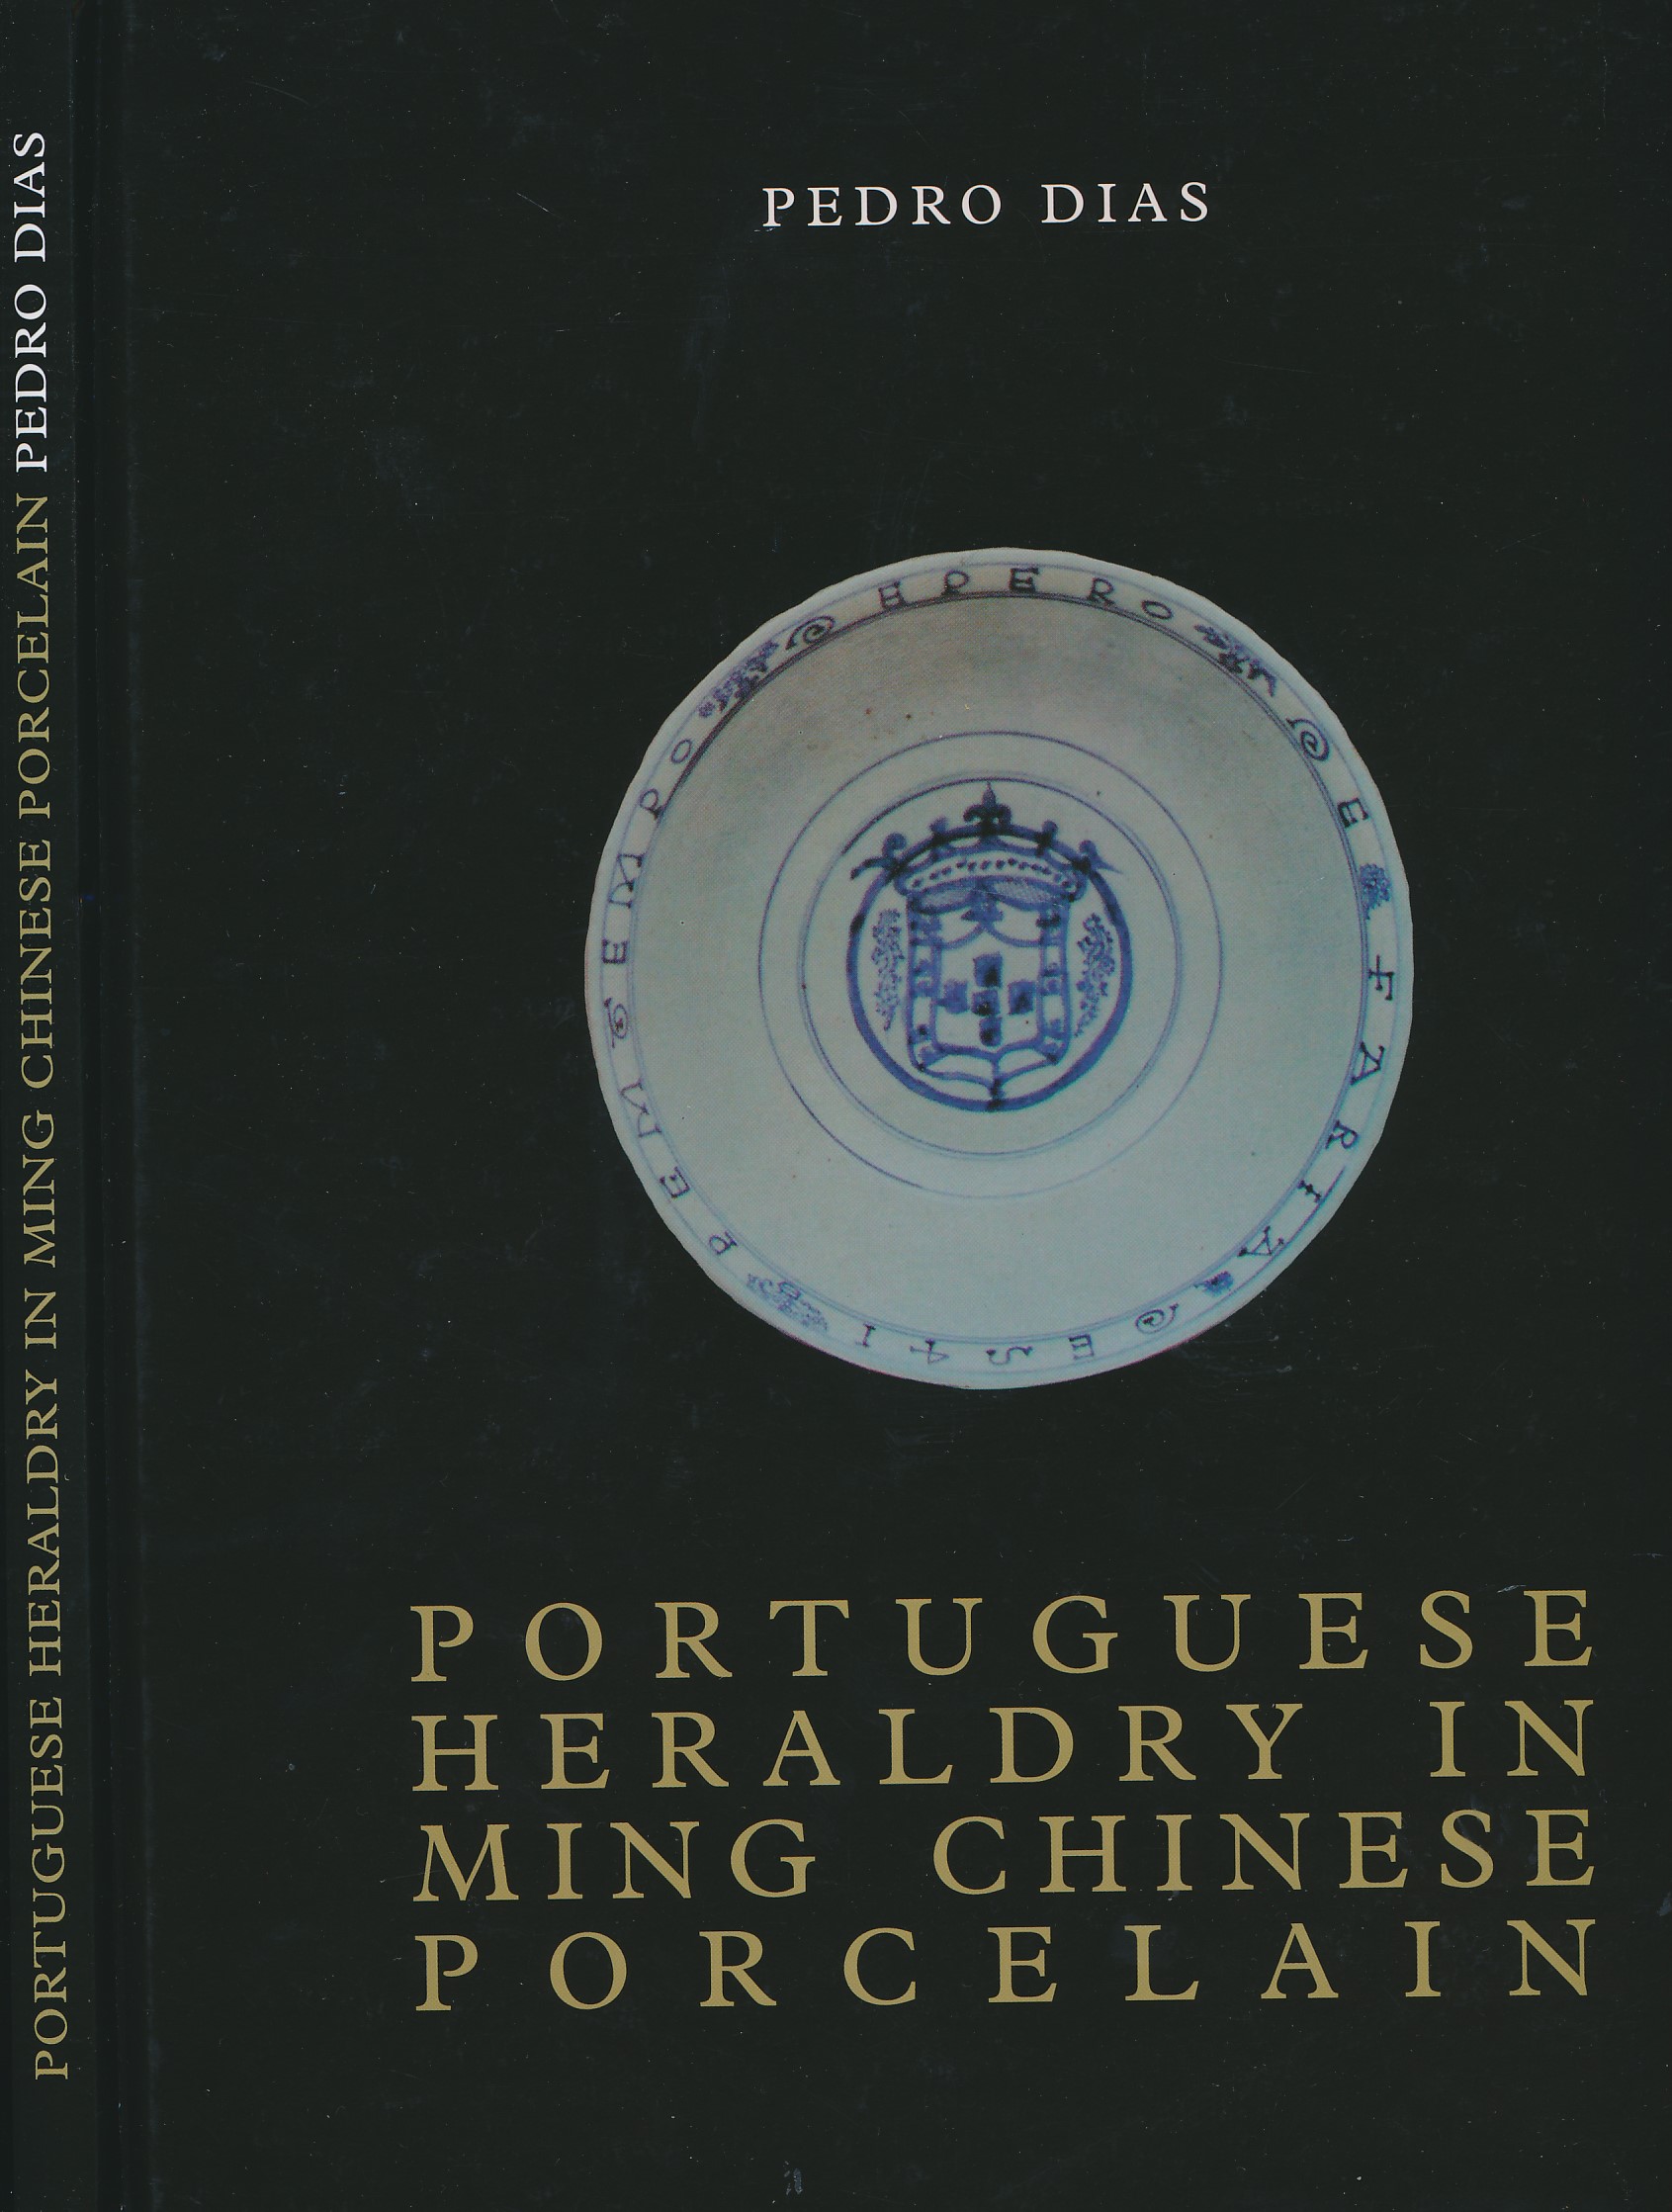 Portuguese Heraldry in Ming Chinese Porcelain